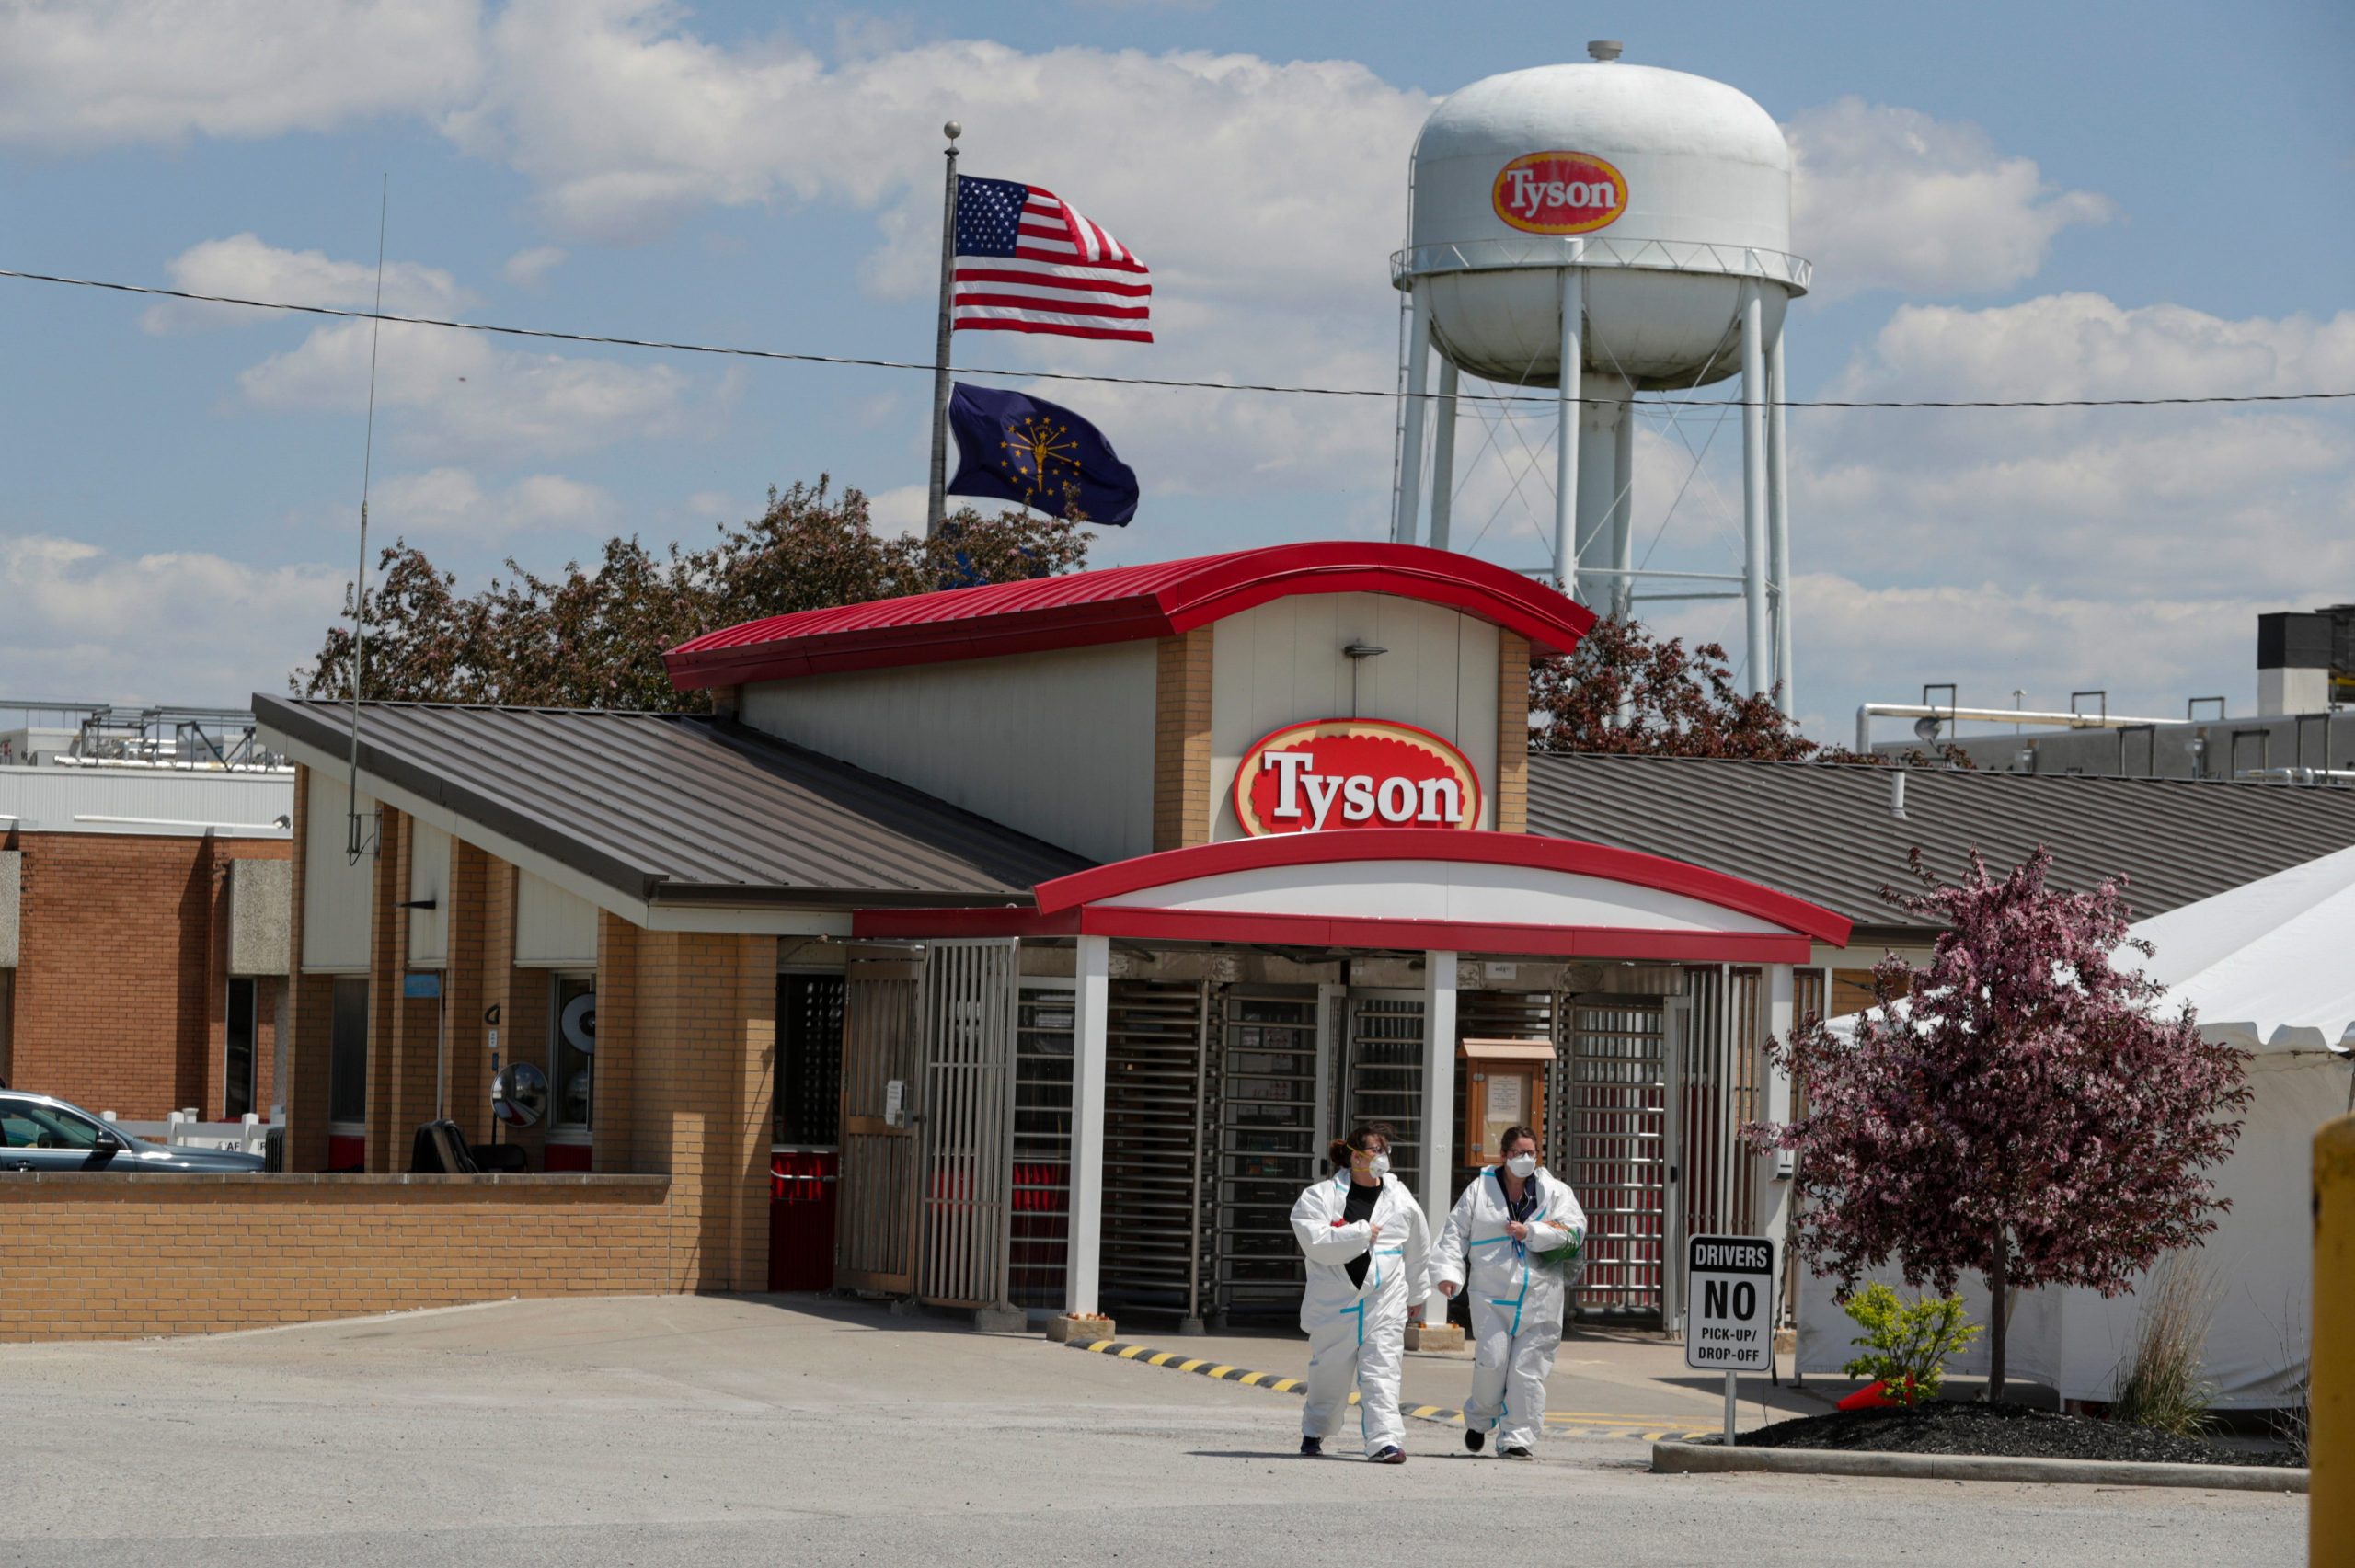 Two people wearing white jumpsuits leave a Tyson Foods facility on a sunny day in Indiana